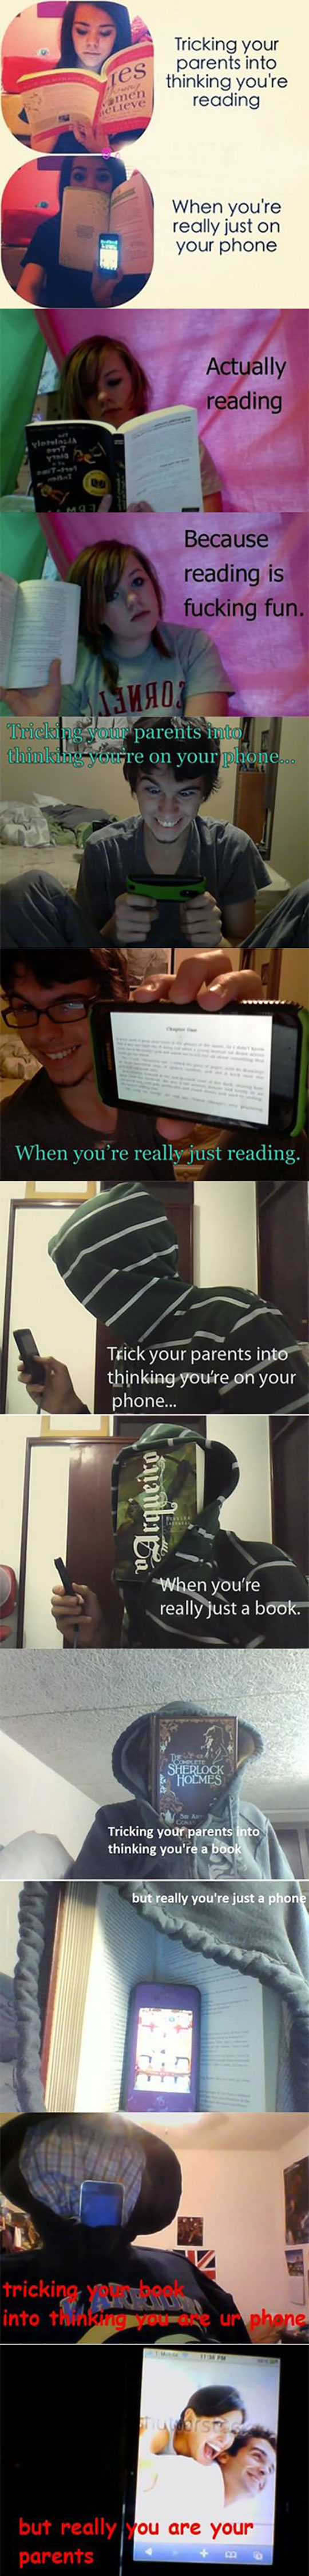 When You Trick Your Parents